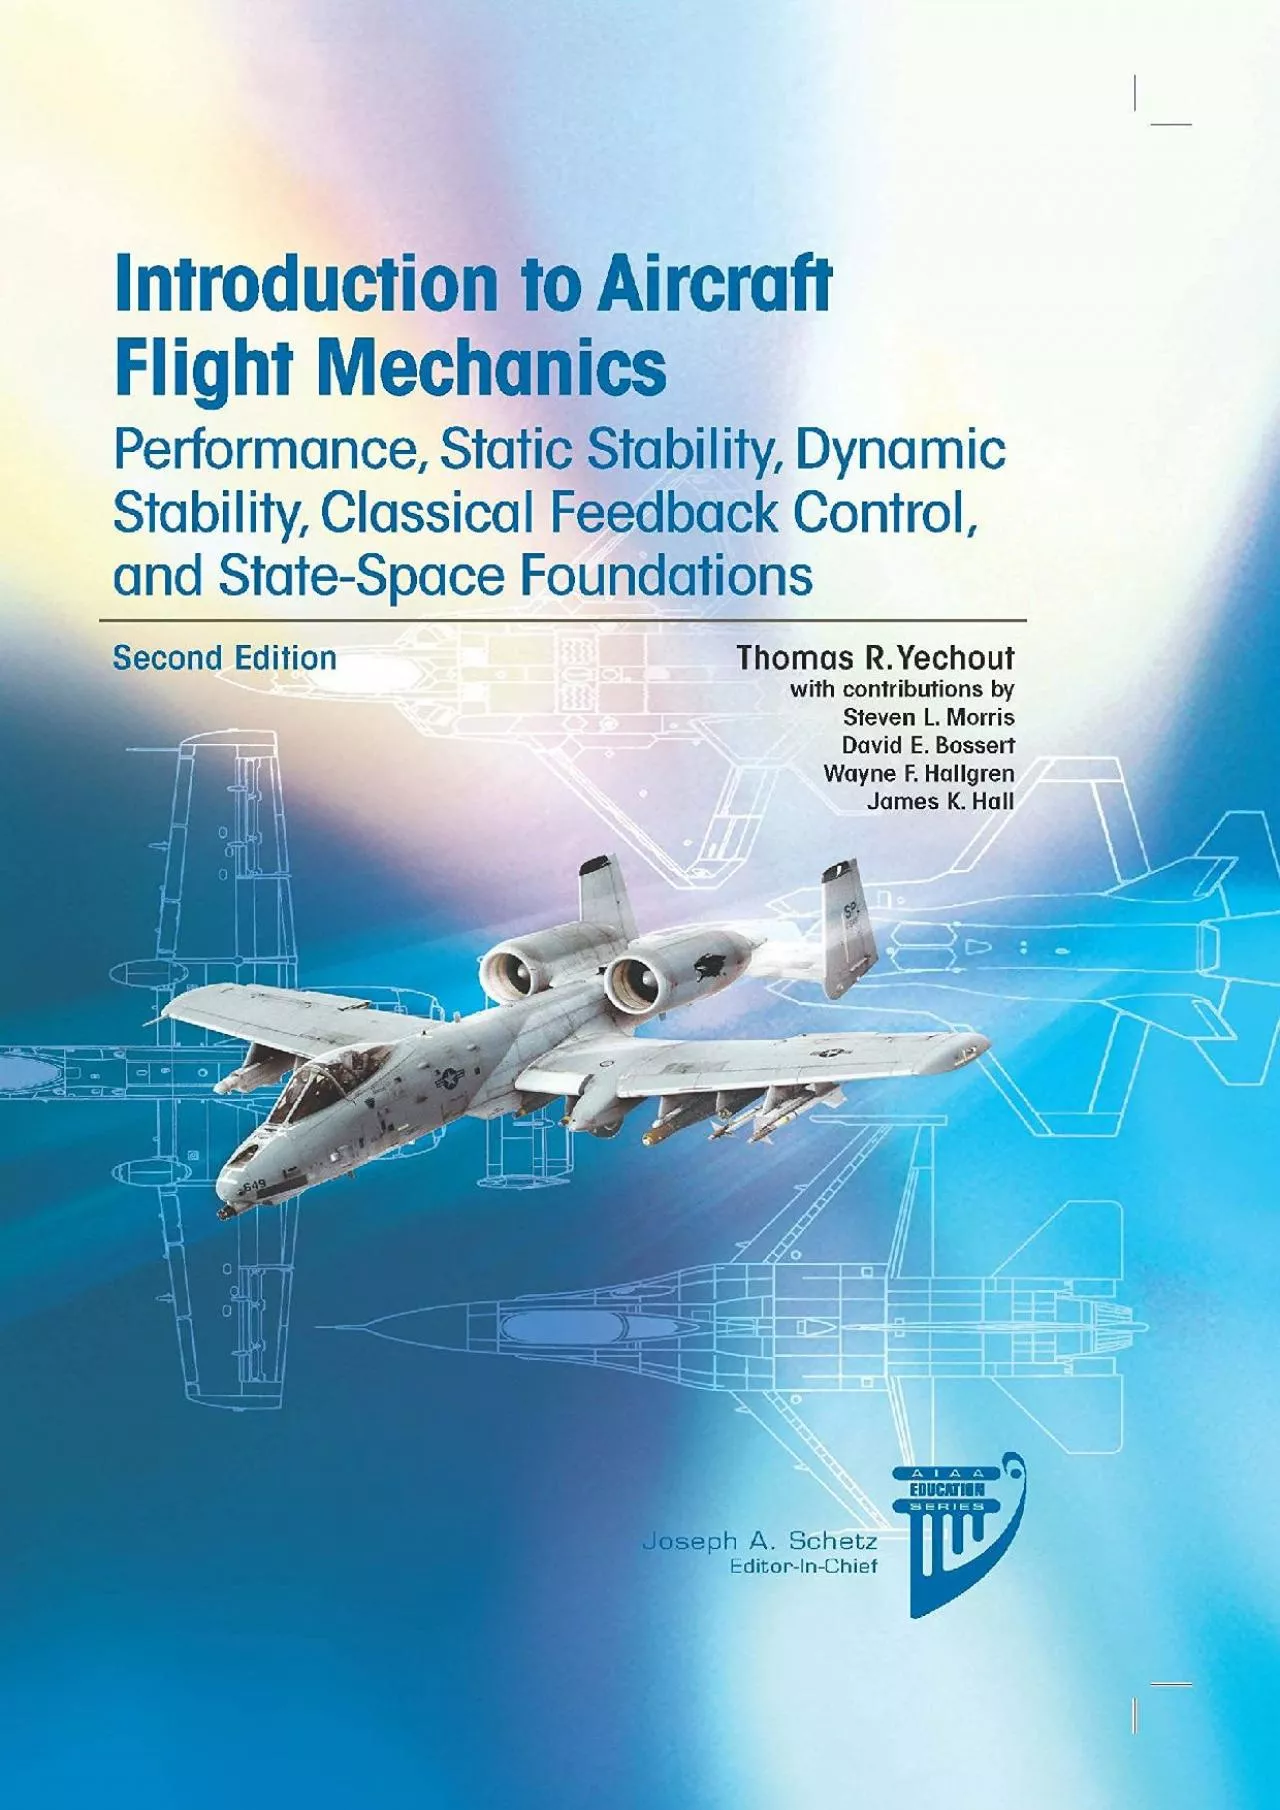 (BOOS)-Introduction to Aircraft Flight Mechanics: Performance, Static Stability, Dynamic